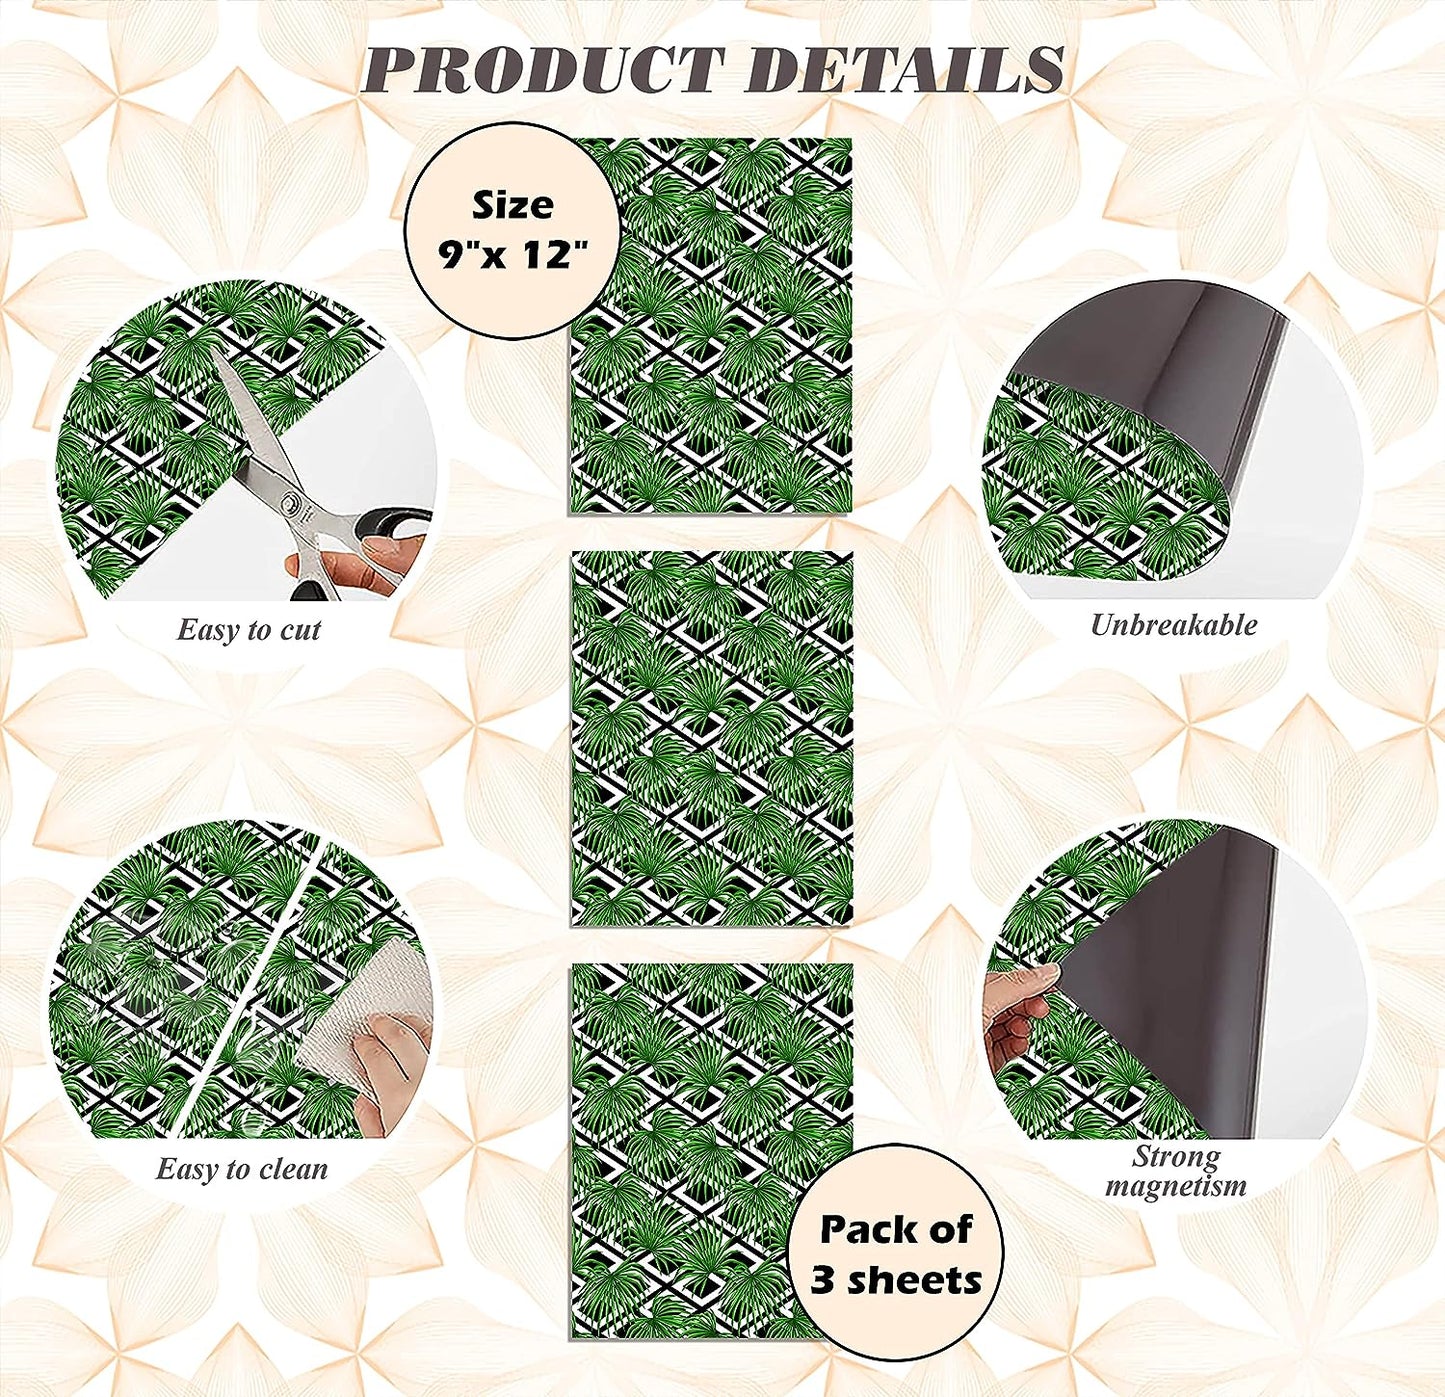 PELICAN INDUSTRIAL Magnetic Locker Wallpaper (Full Sheet Magnetic) - Remove & Reuse Decorative Vinyl - Made in USA - Fade, Tear and Water Resistant - (Tropical Leaves) - Pack of 3 Sheets (vb057c)